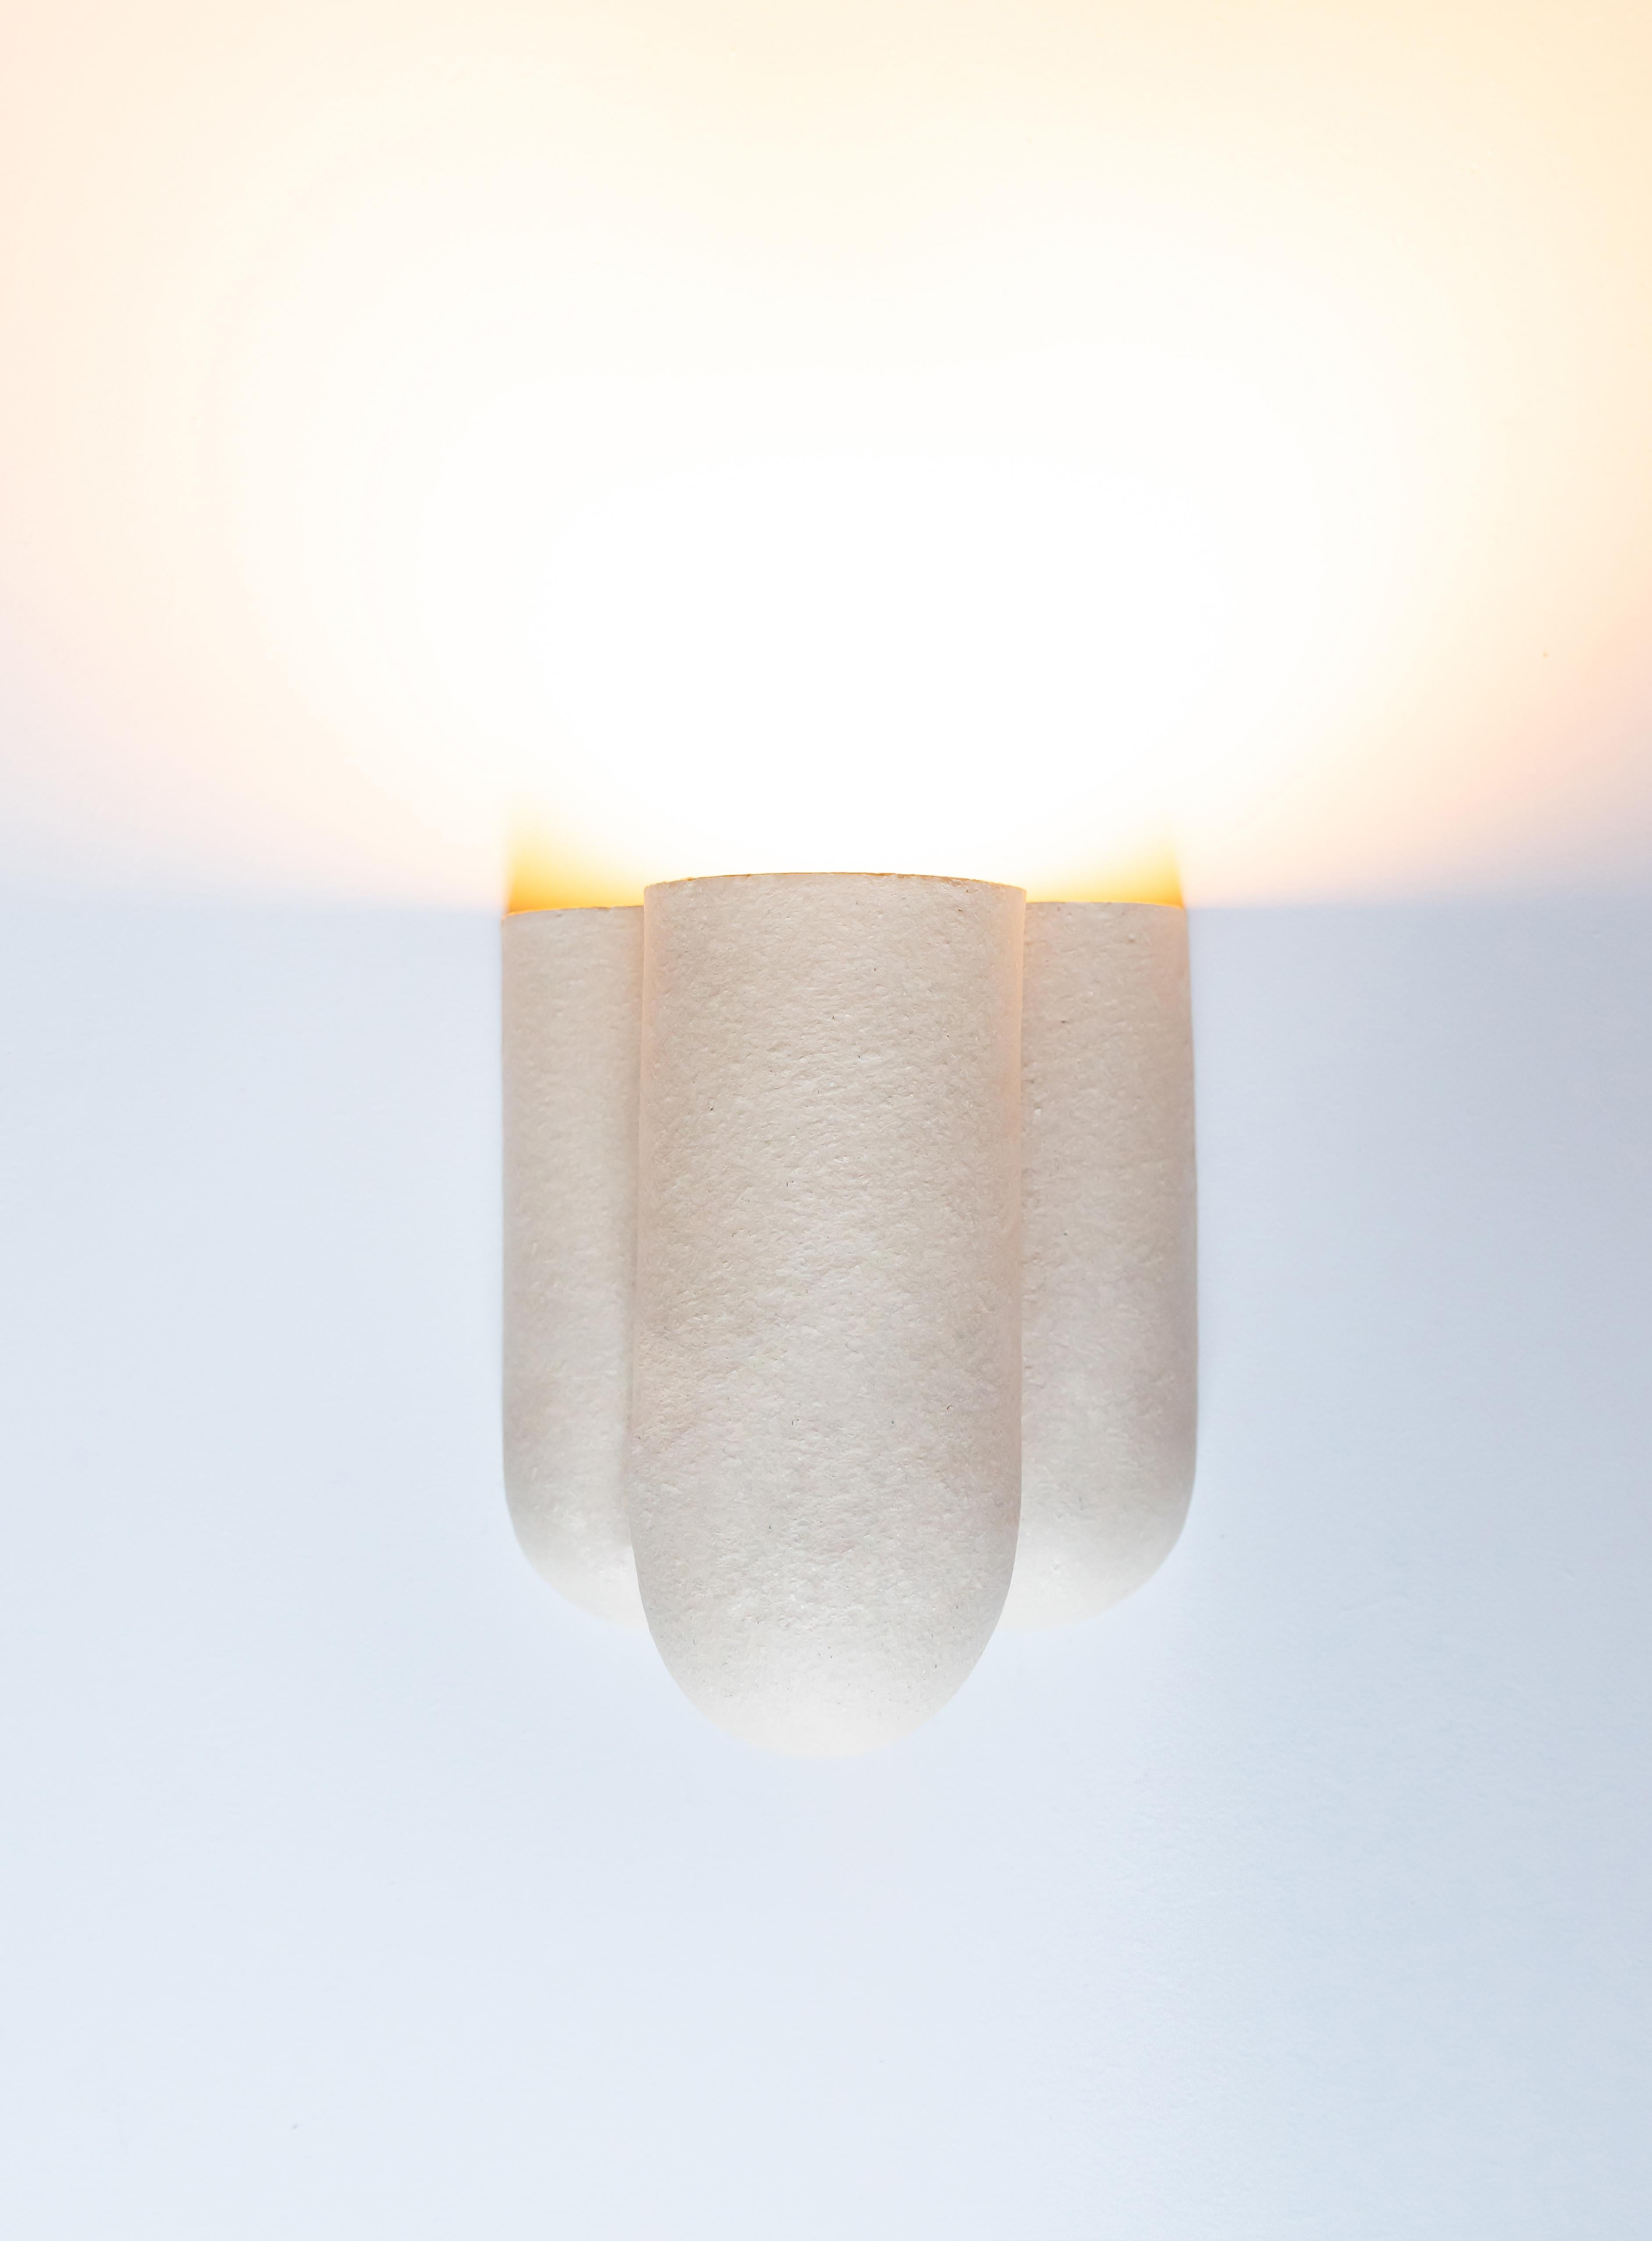 Wall light by Lisa Allegra.
Dimensions: W 24 x D 17 x H 22,5 cm.
Materials: Clay
Variations available.

Born in 1986 in Paris, Lisa Allegra has earned in 2010 a degree in furniture design from the École Supérieure des Arts Décoratifs. She has